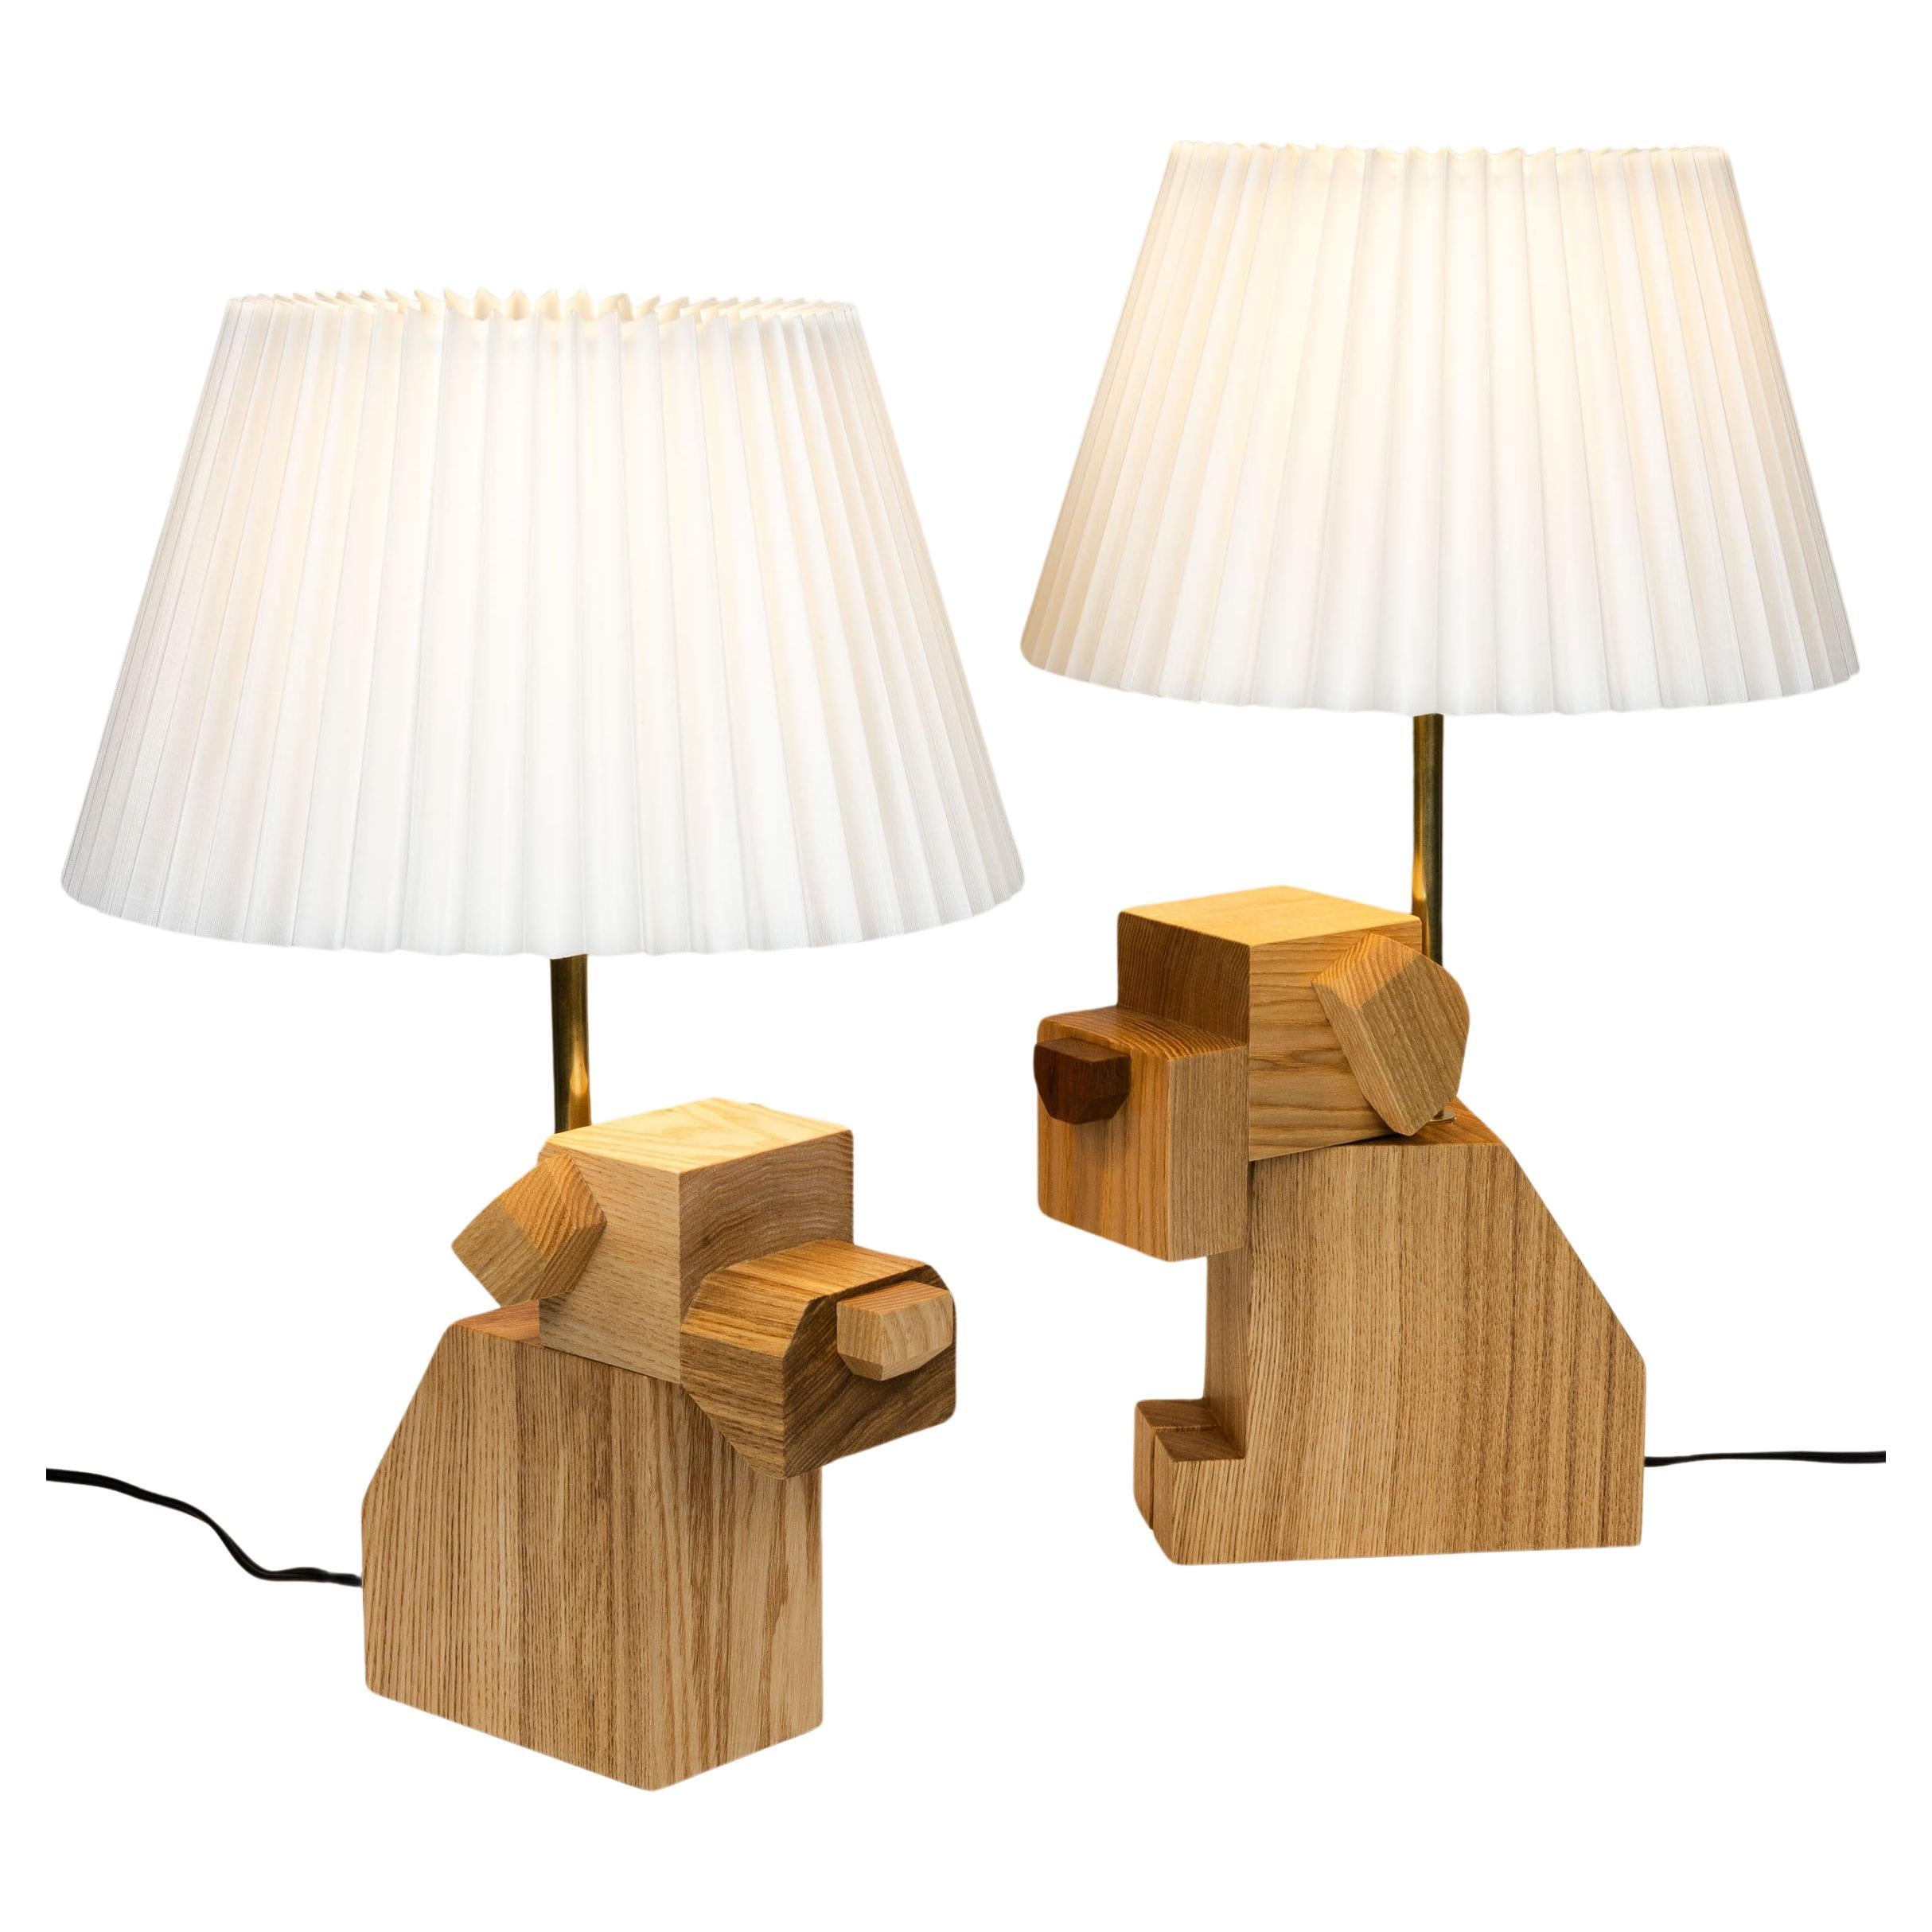 Pair of Wood Dog Table Lamps with White Fabric Shades, hand-crafted, hardwood For Sale